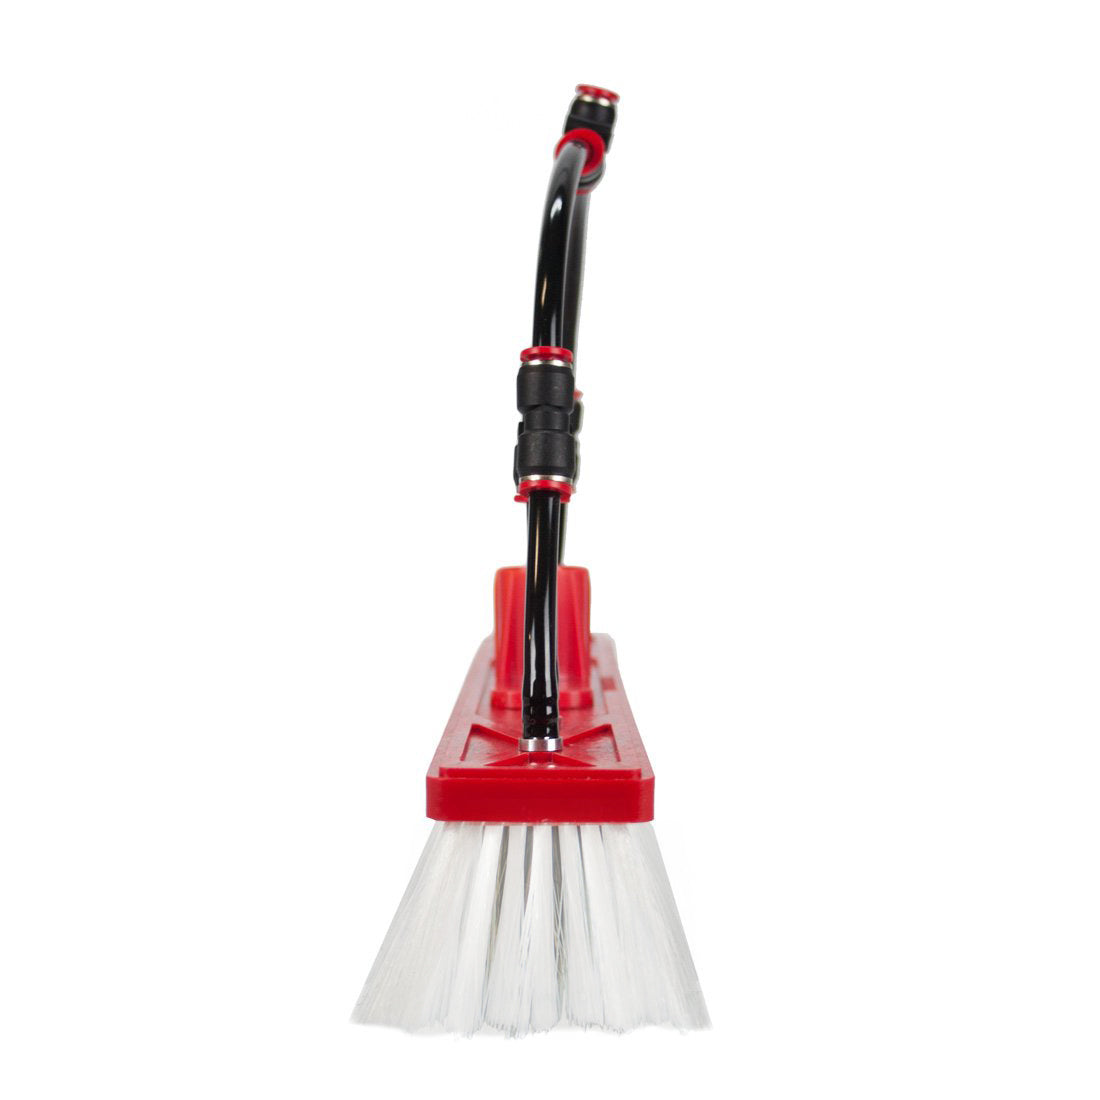 Tucker Hybrid Brush with Euro Socket and Four Fan Jets - 18 Inches